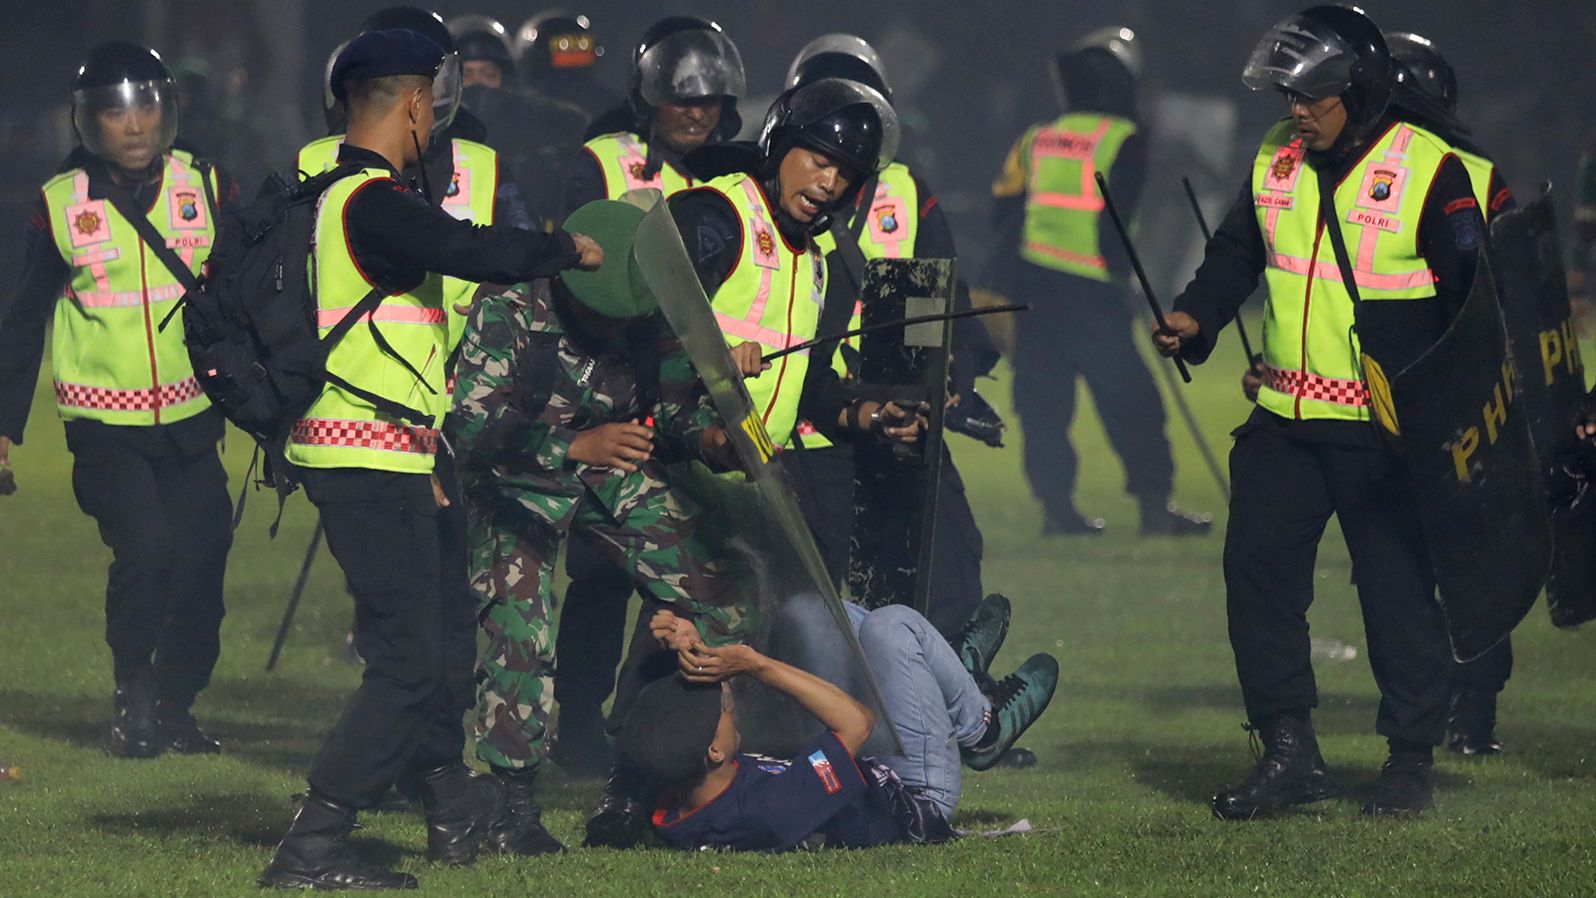 Indonesian security officers detain a fan on the pitch.